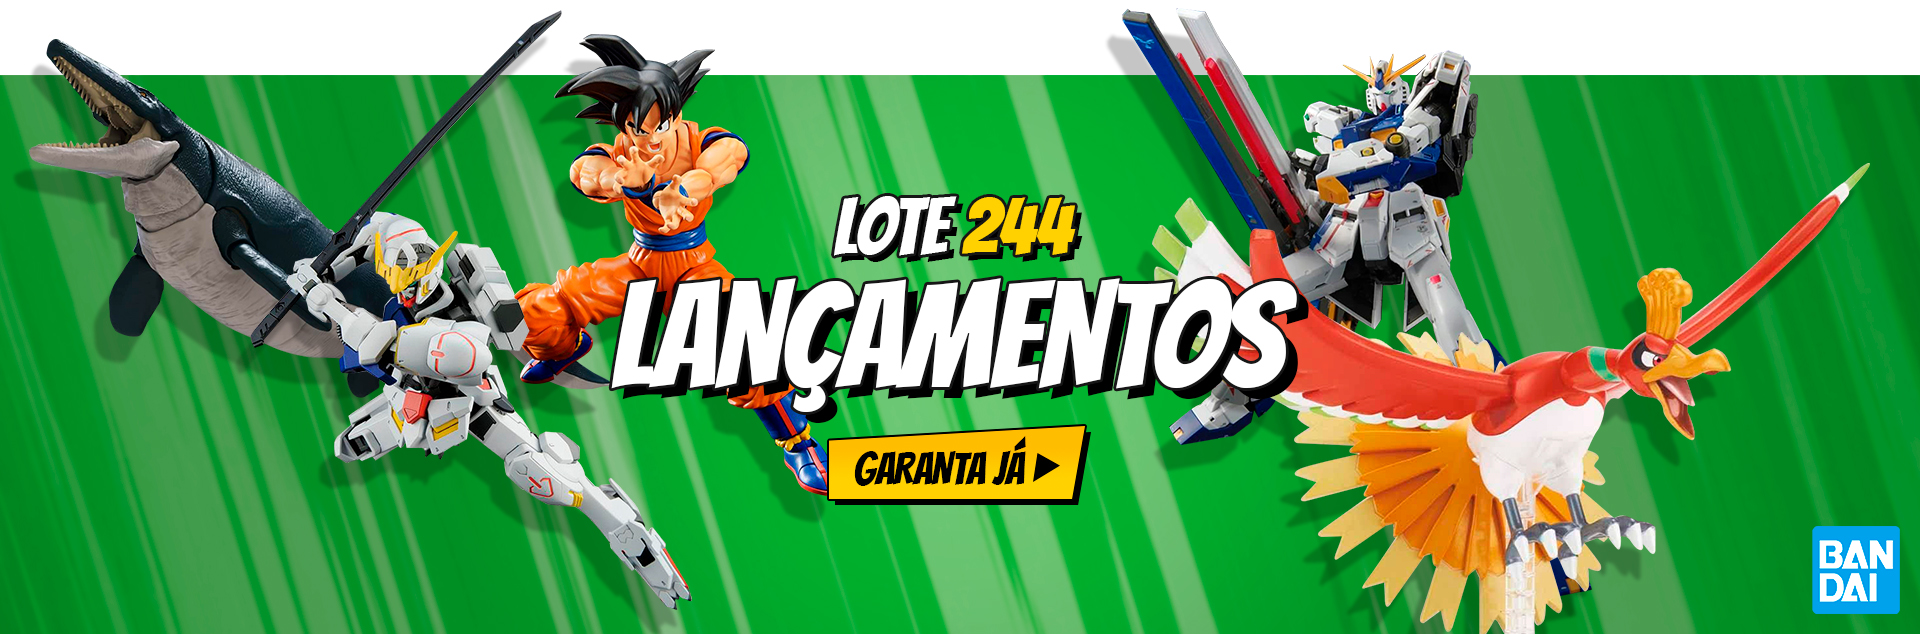 Lote 244